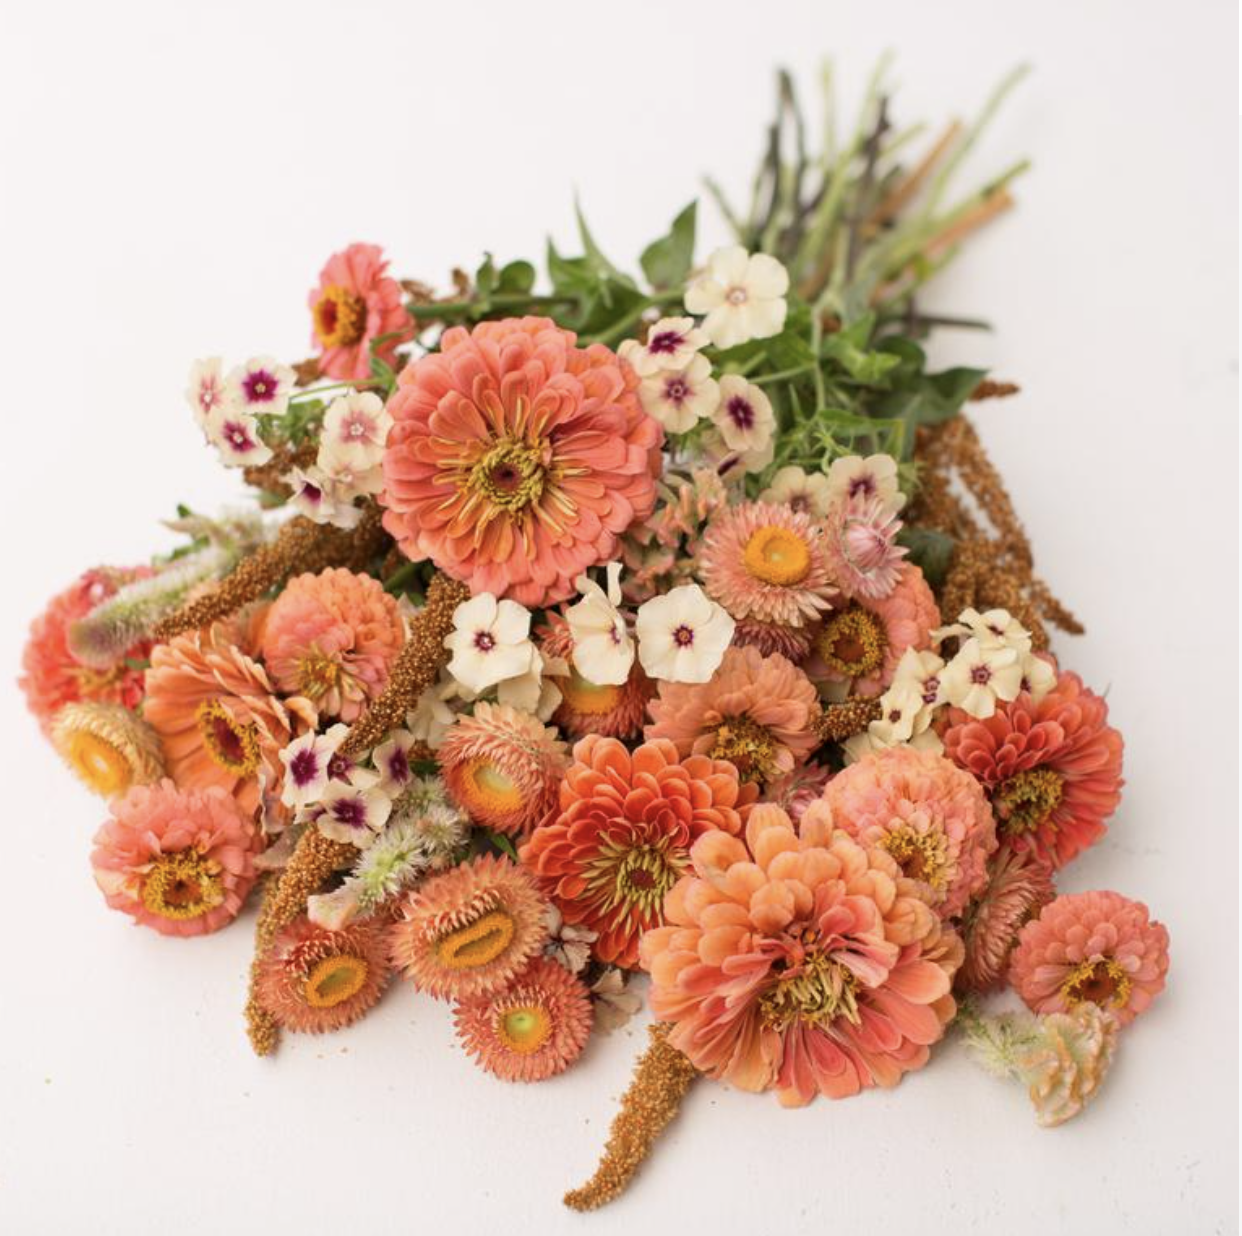  Seed Collection Salmon Rose Mix - Floret Flower Farm  